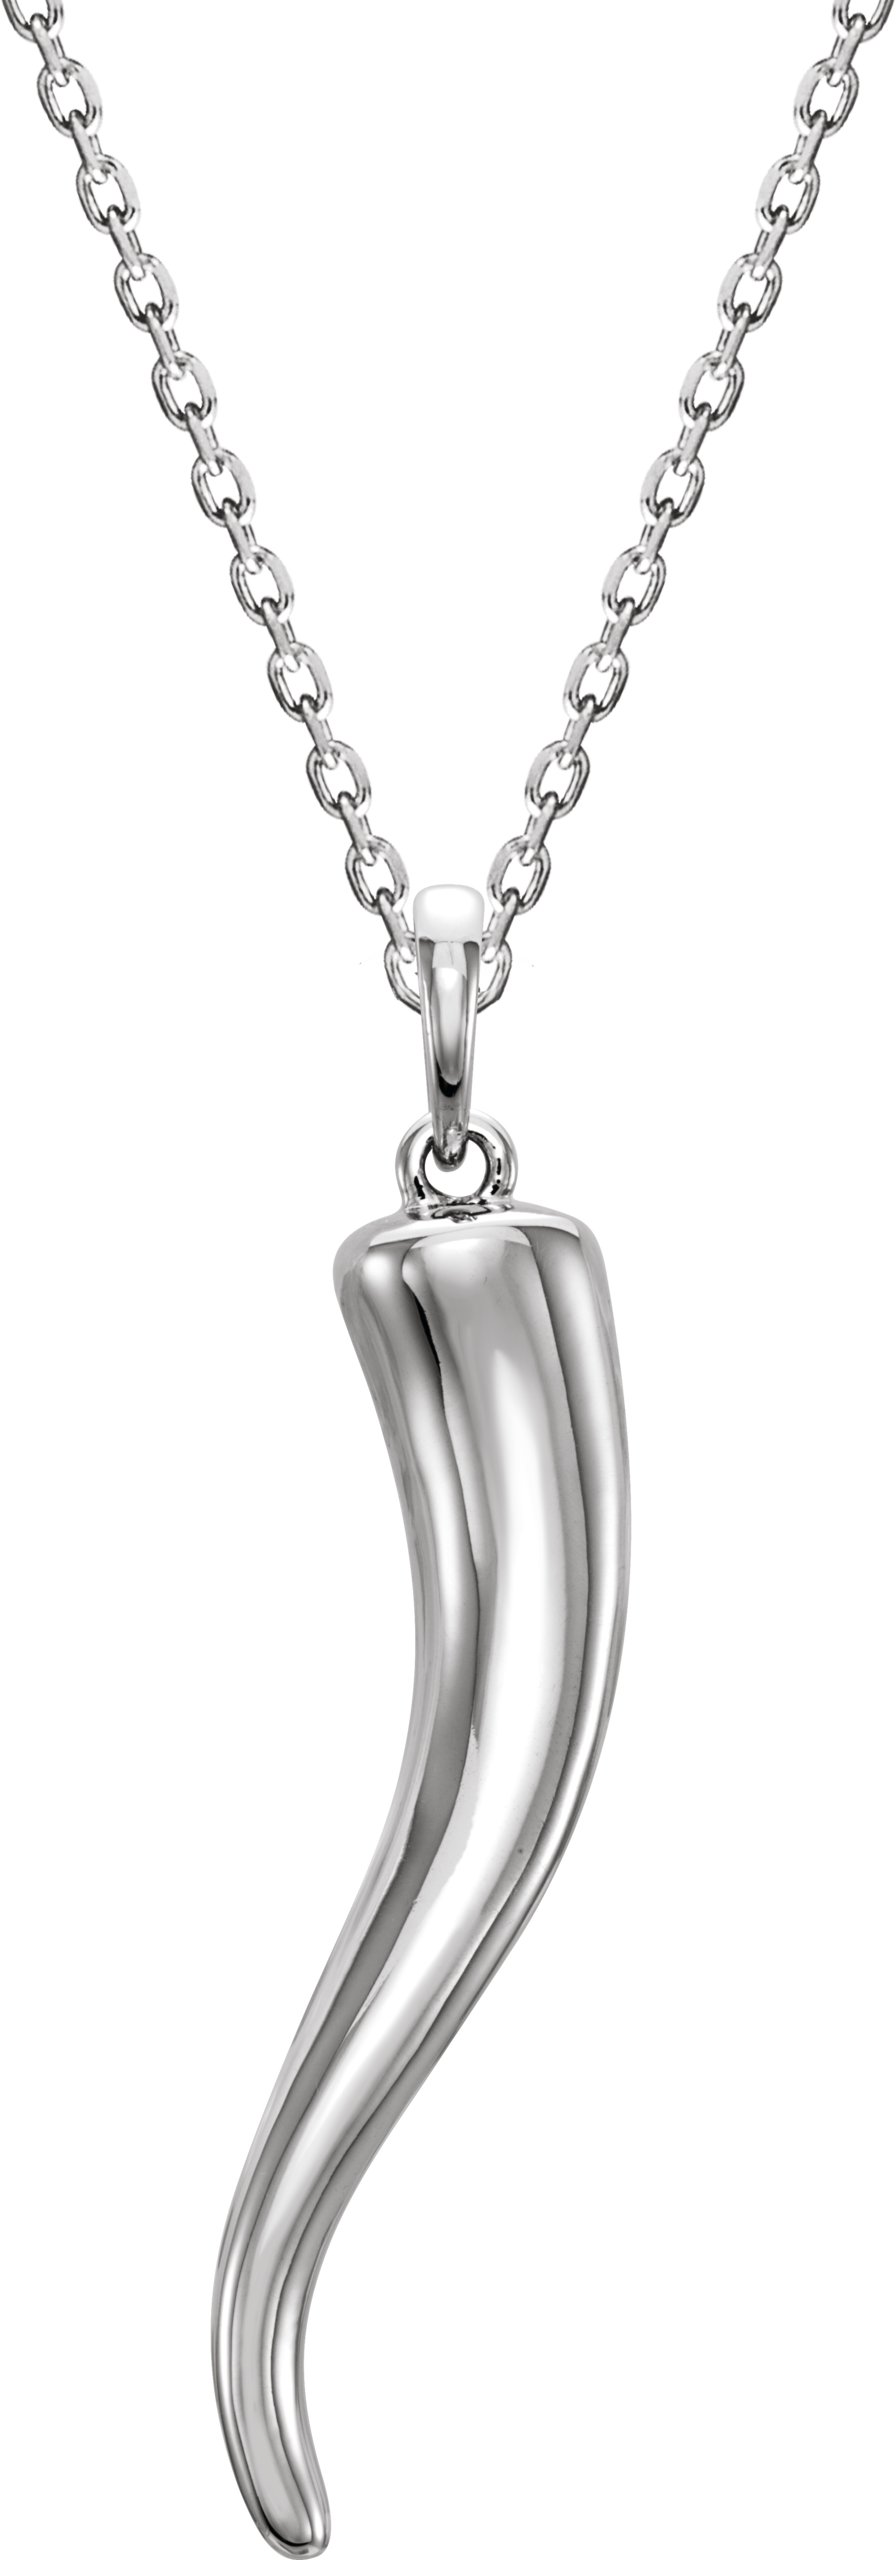 Sterling Silver Italian Horn 16-18" Necklace